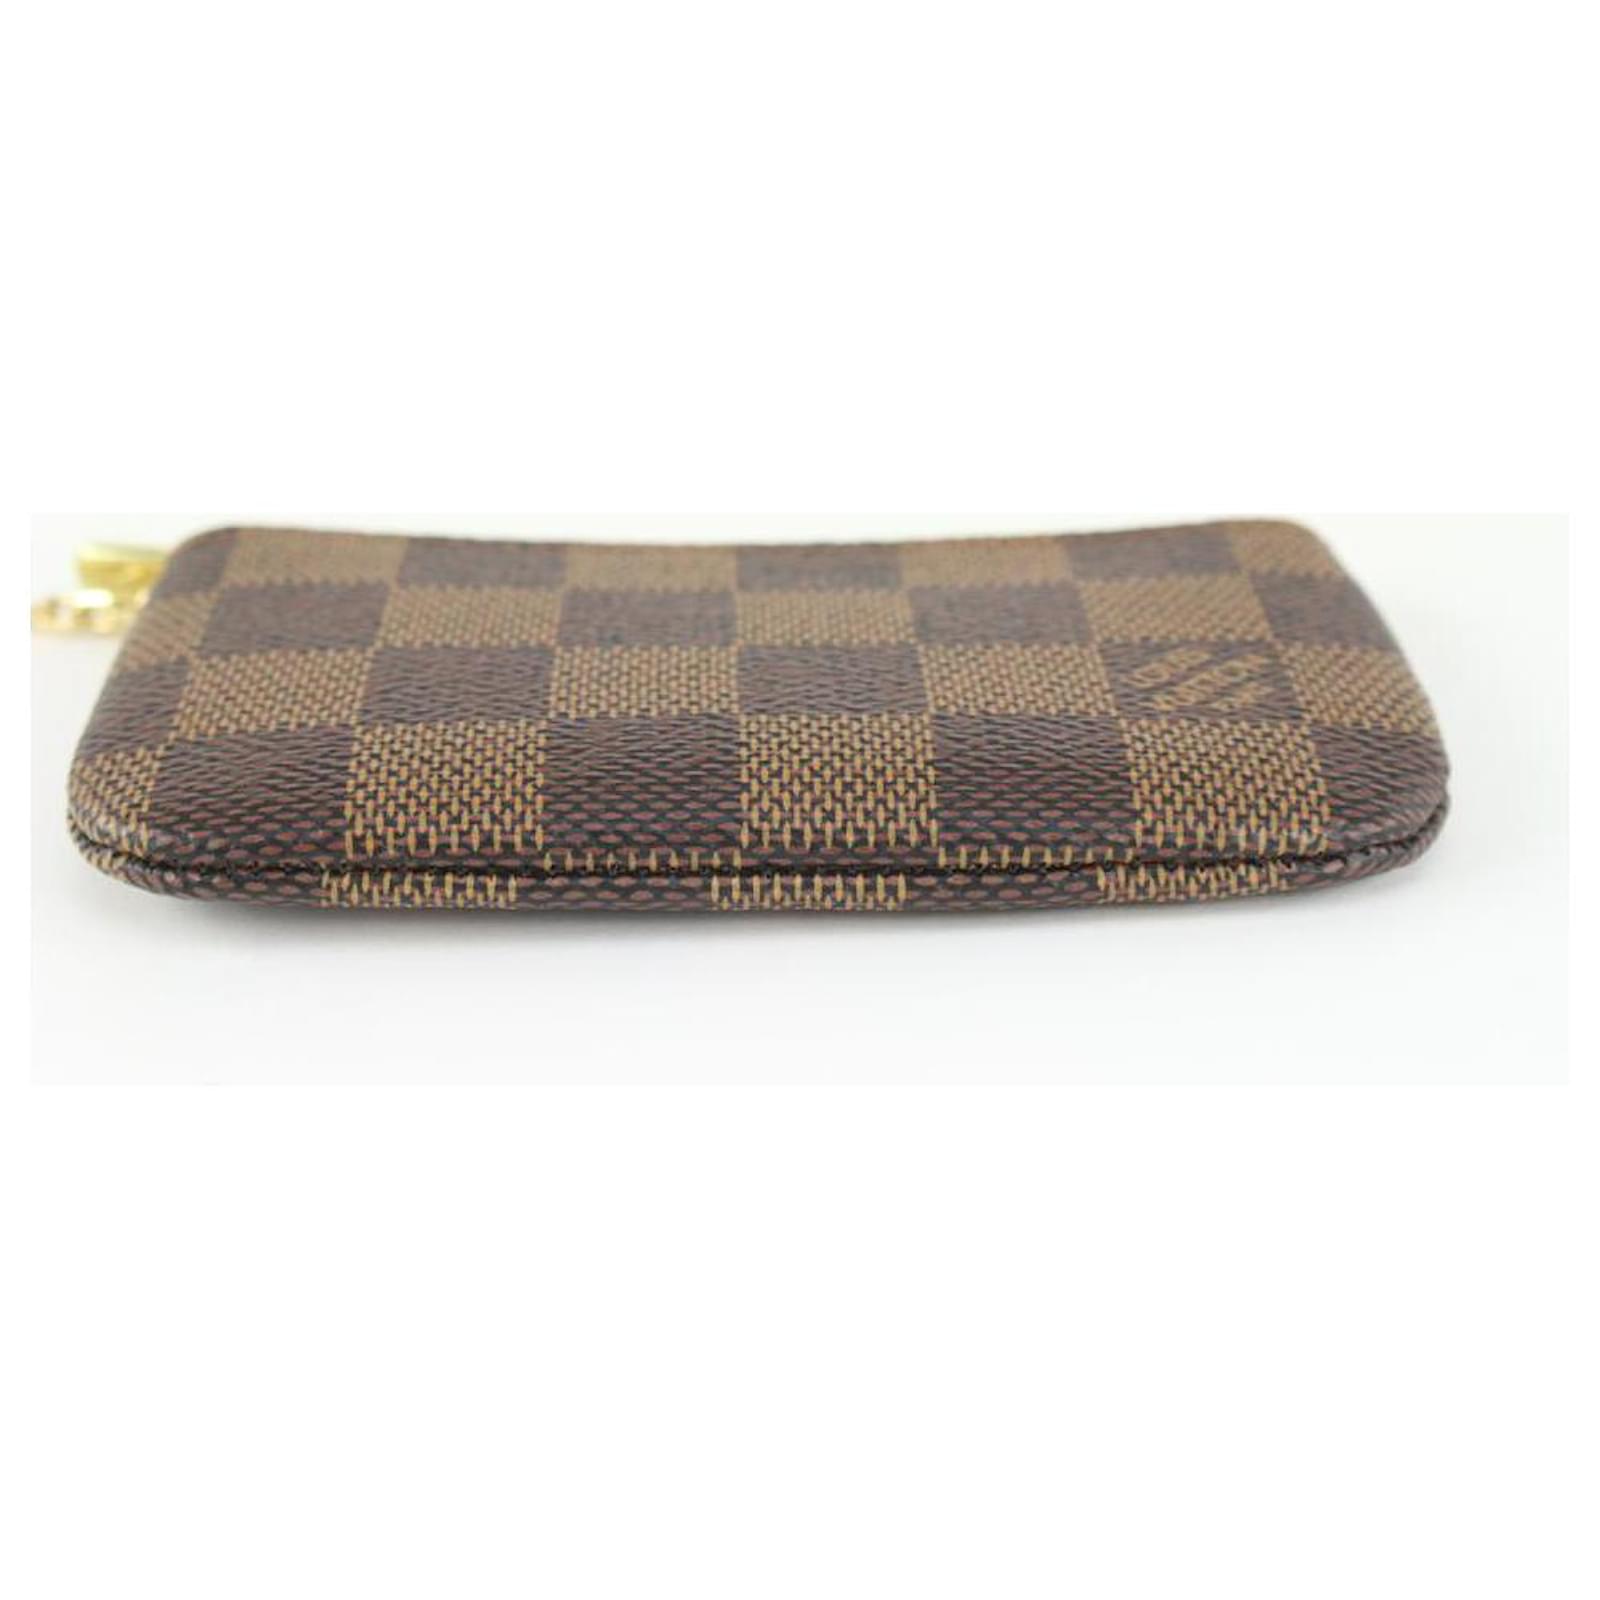 LOUIS VUITTON CASE FOR IPAD MINI IN LEATHER DAMIER CAMEL POUCH